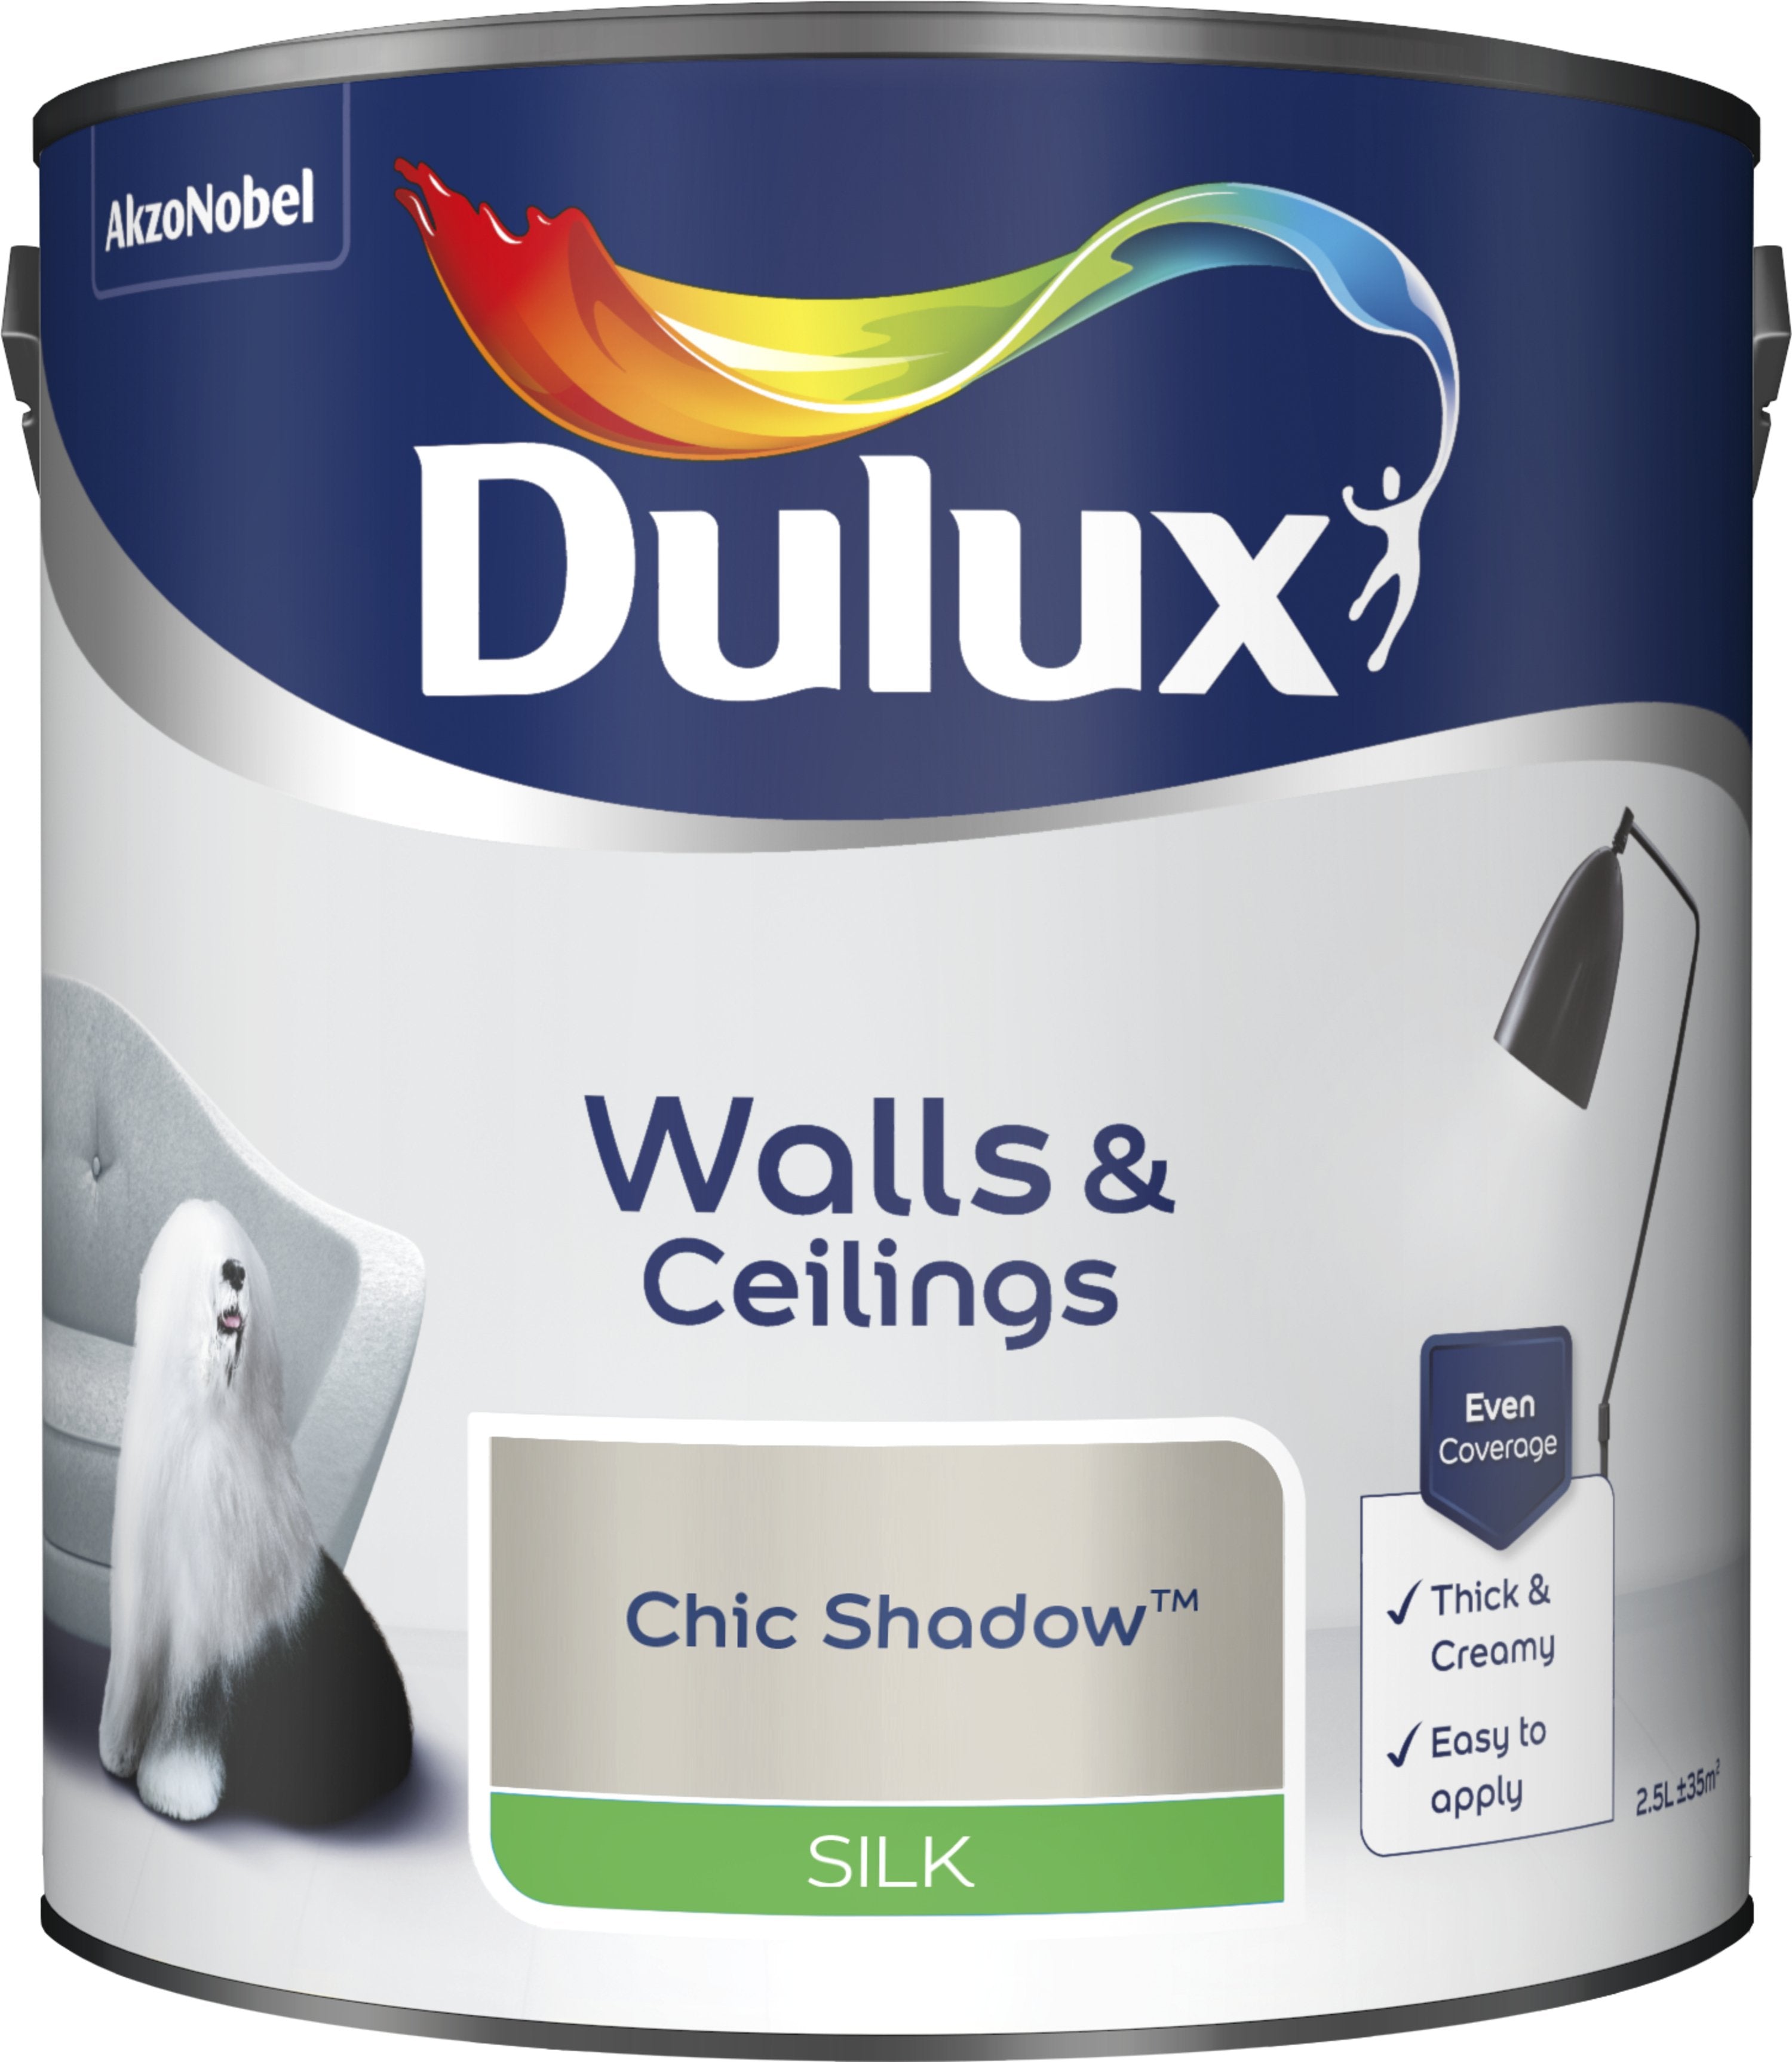 Dulux Silk Emulsion Paint For Walls And Ceilings - Chic Shadow 2.5L Garden & Diy  Home Improvements